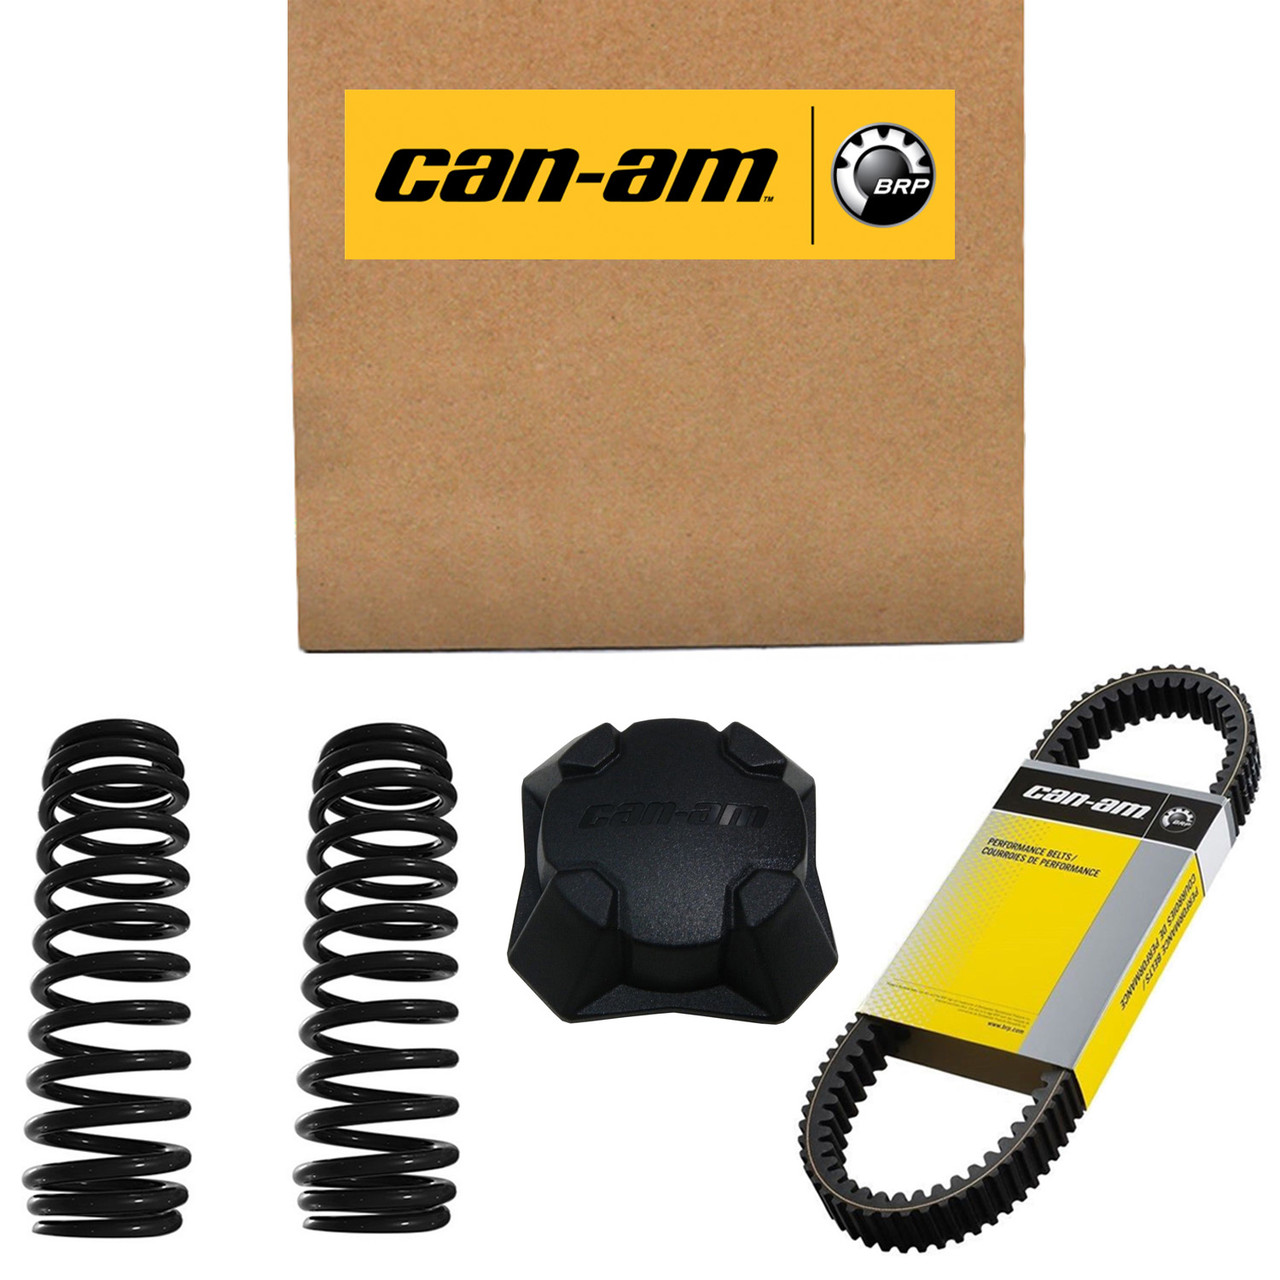 Can-Am New OEM Variator Cover, 420212500